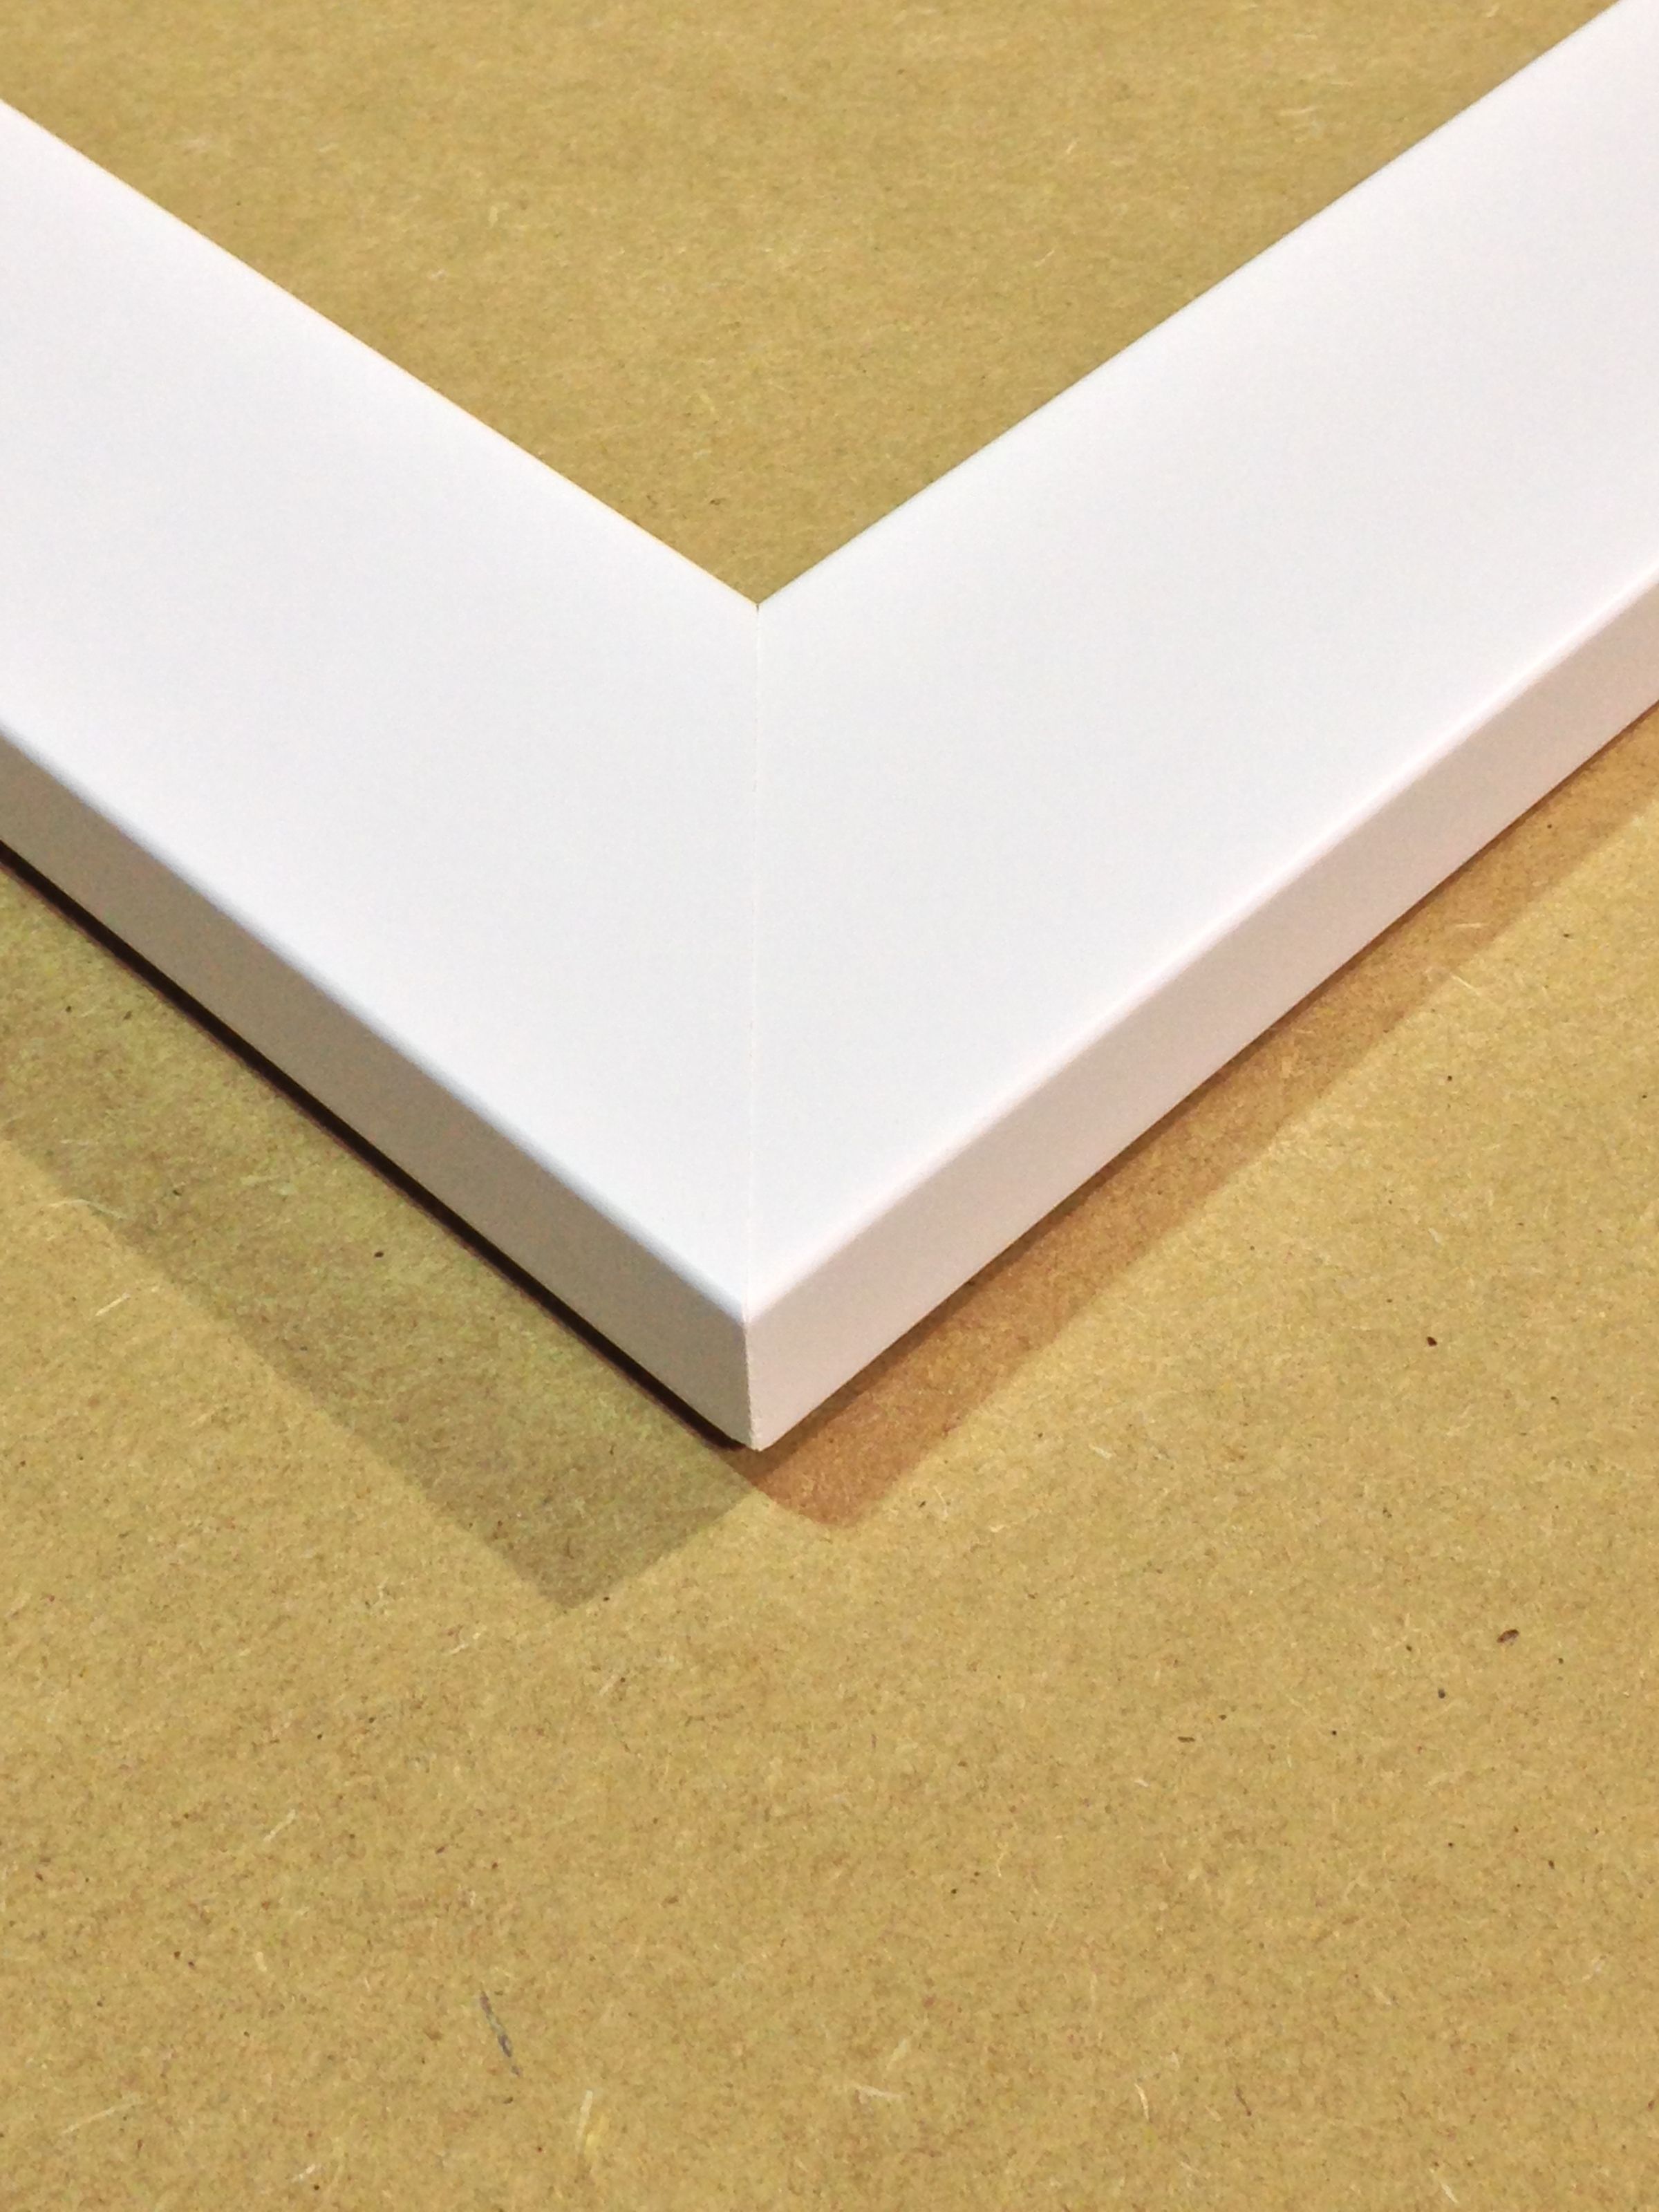 How To Get Perfect Corner Joints on a White Frame | The Wall Space ...